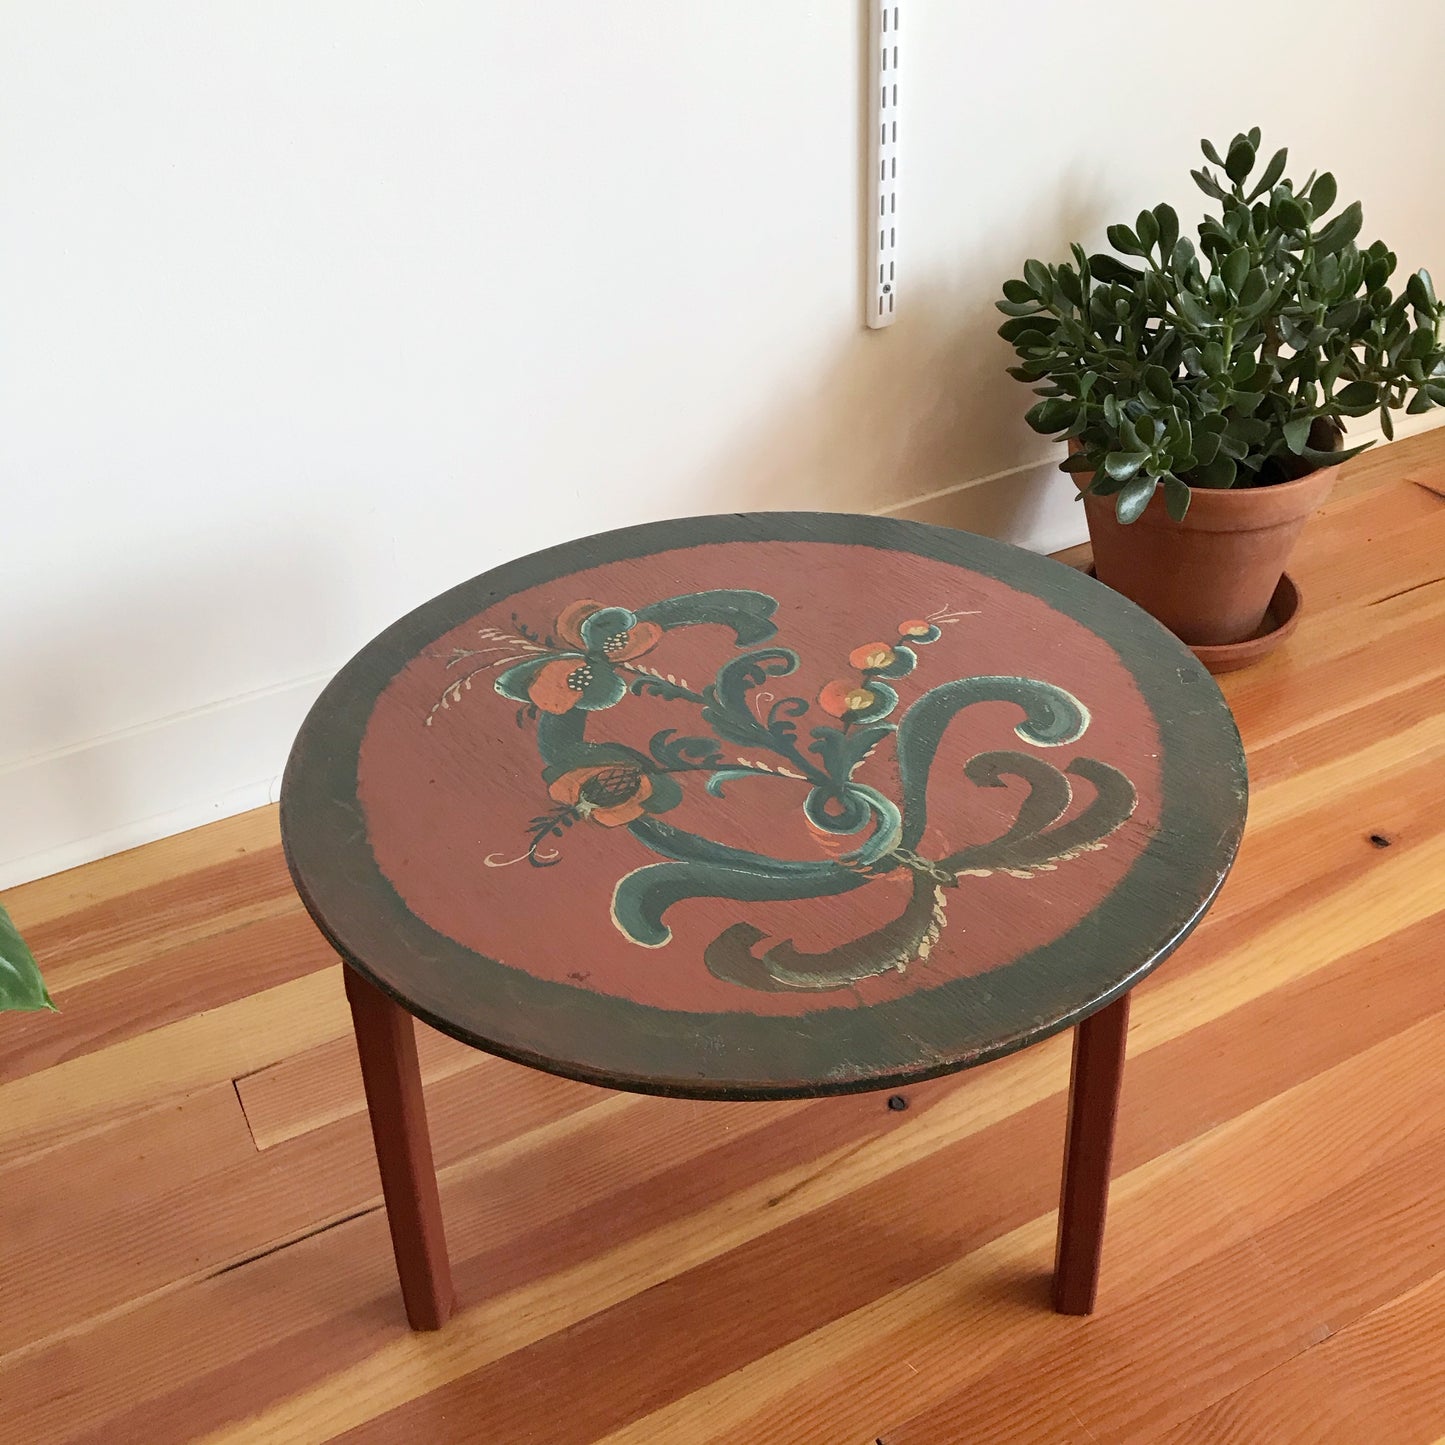 Vintage Hand-painted Folding Table